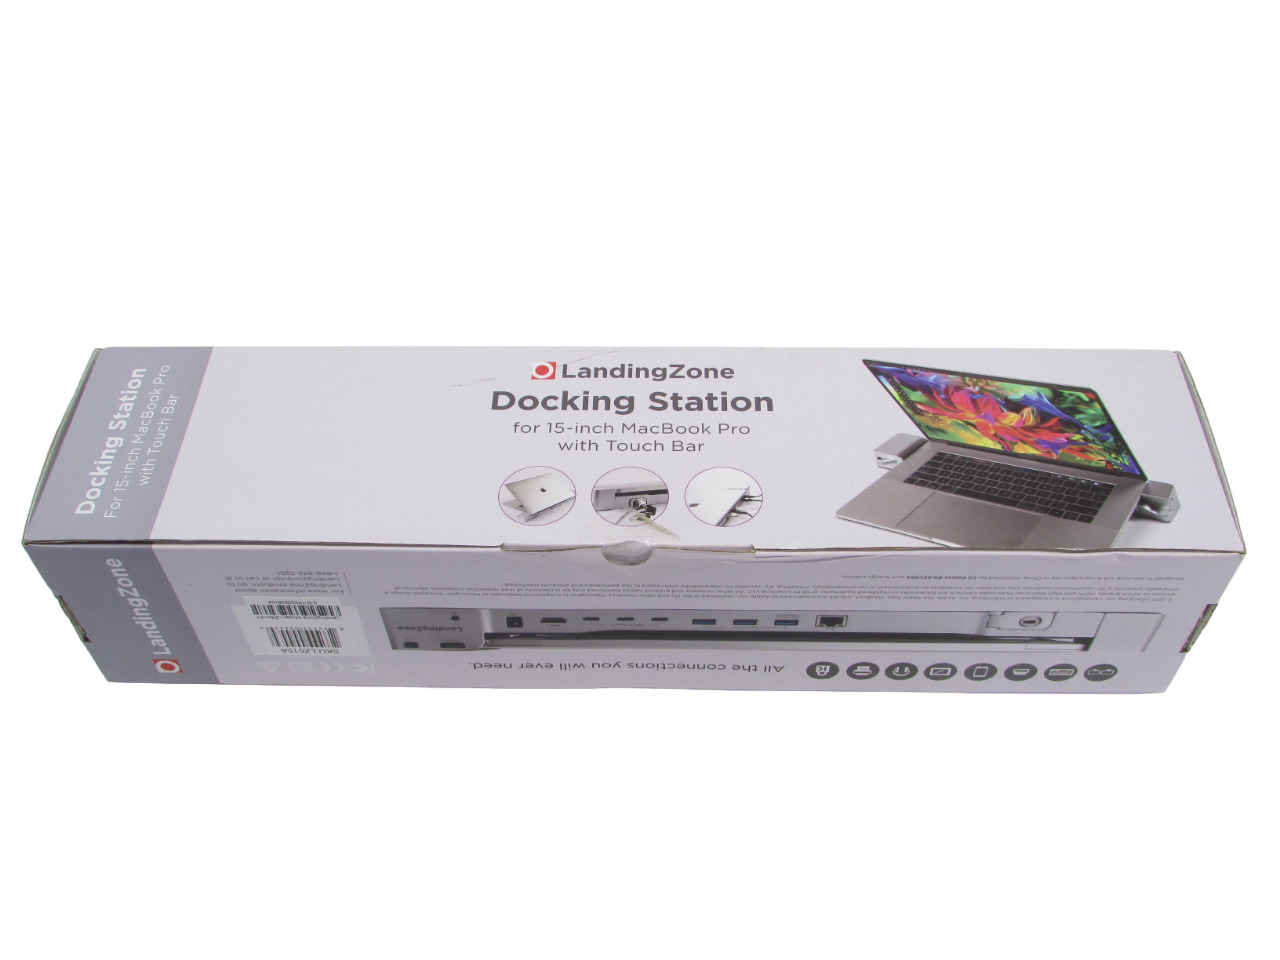 LandingZone LZ015A Docking Station for the MacBook Pro with Touch Bar